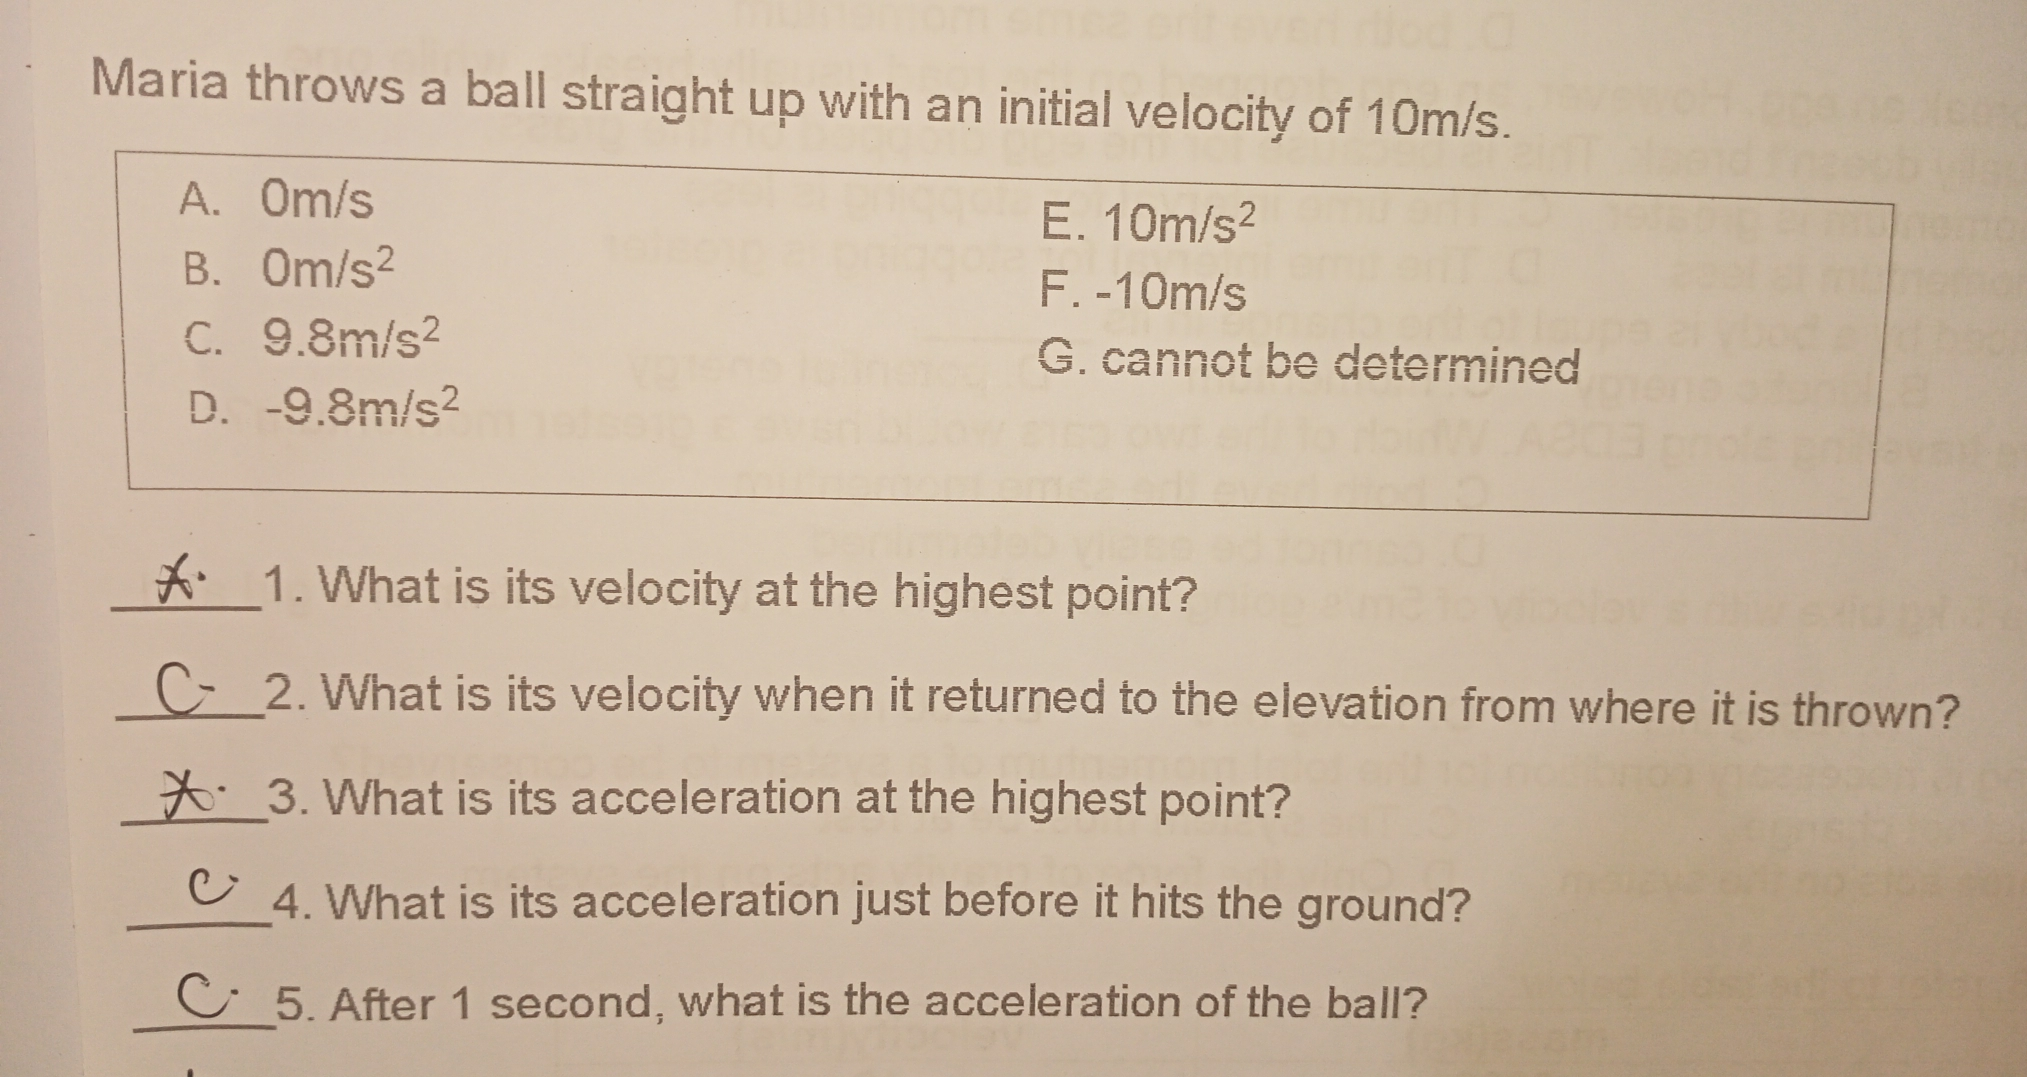 Maria throws a ball straight up with an initial velocity of 10m/s. A.Om/s E. 10m/s2 B. 0m/s2 F. -10m/s C. 9.8m/s2 G. cannot be determined D. -9.8m/s2 1. What is its velocity at the highest point? 2. What is its velocity when it returned to the elevation from where it is thrown? 3. What is its acceleration at the highest point? 4. What is its acceleration just before it hits the ground? 5. After 1 second, what is the acceleration of the ball?